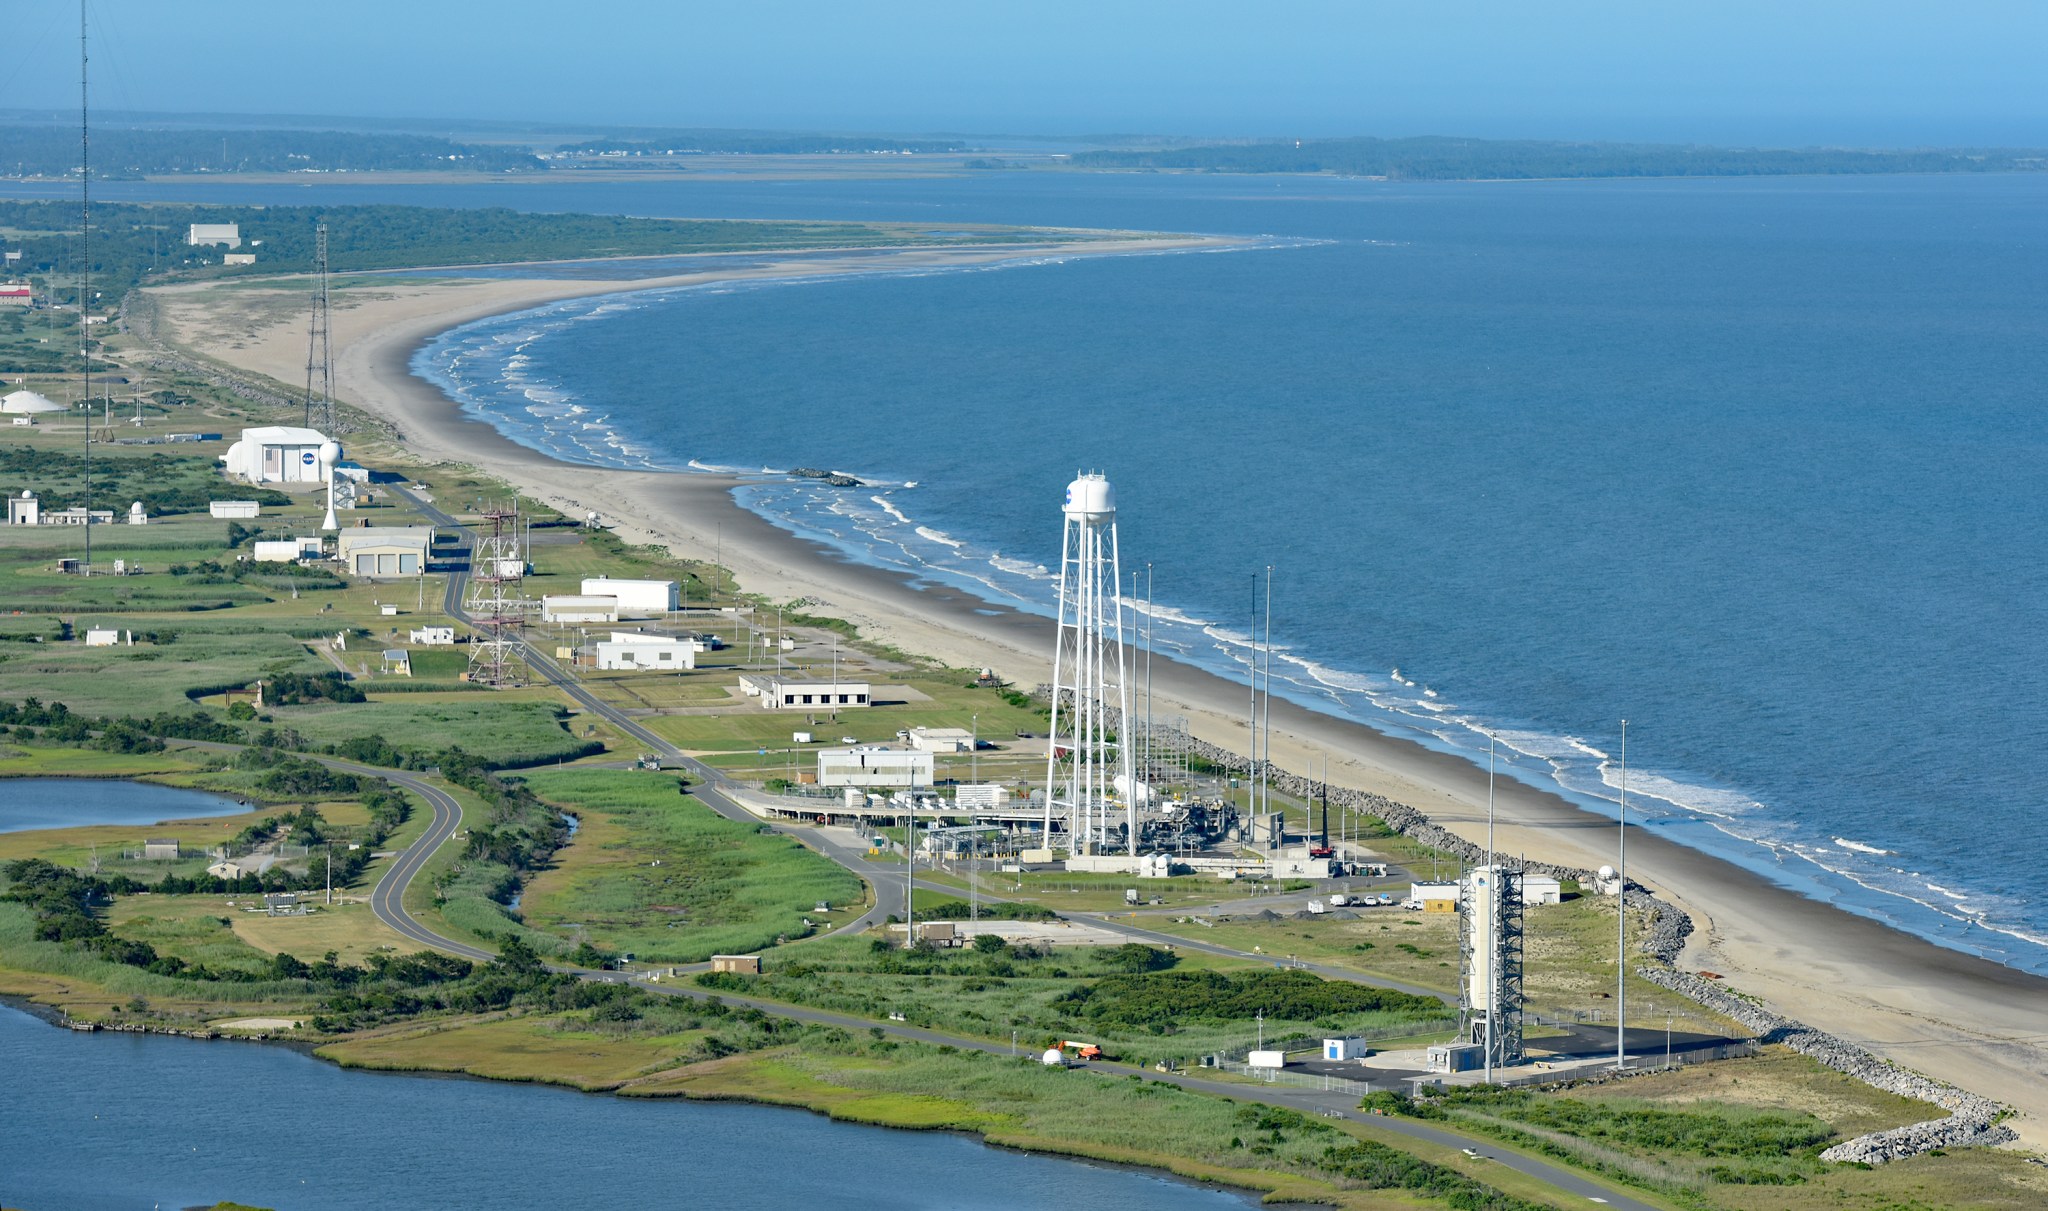 Aerial view of the coastal launch range of Wallops Flight Facility, showing a blue Atlantic Ocean on the right; white buildings along a tan coastline back up to a green, marshy landscape.